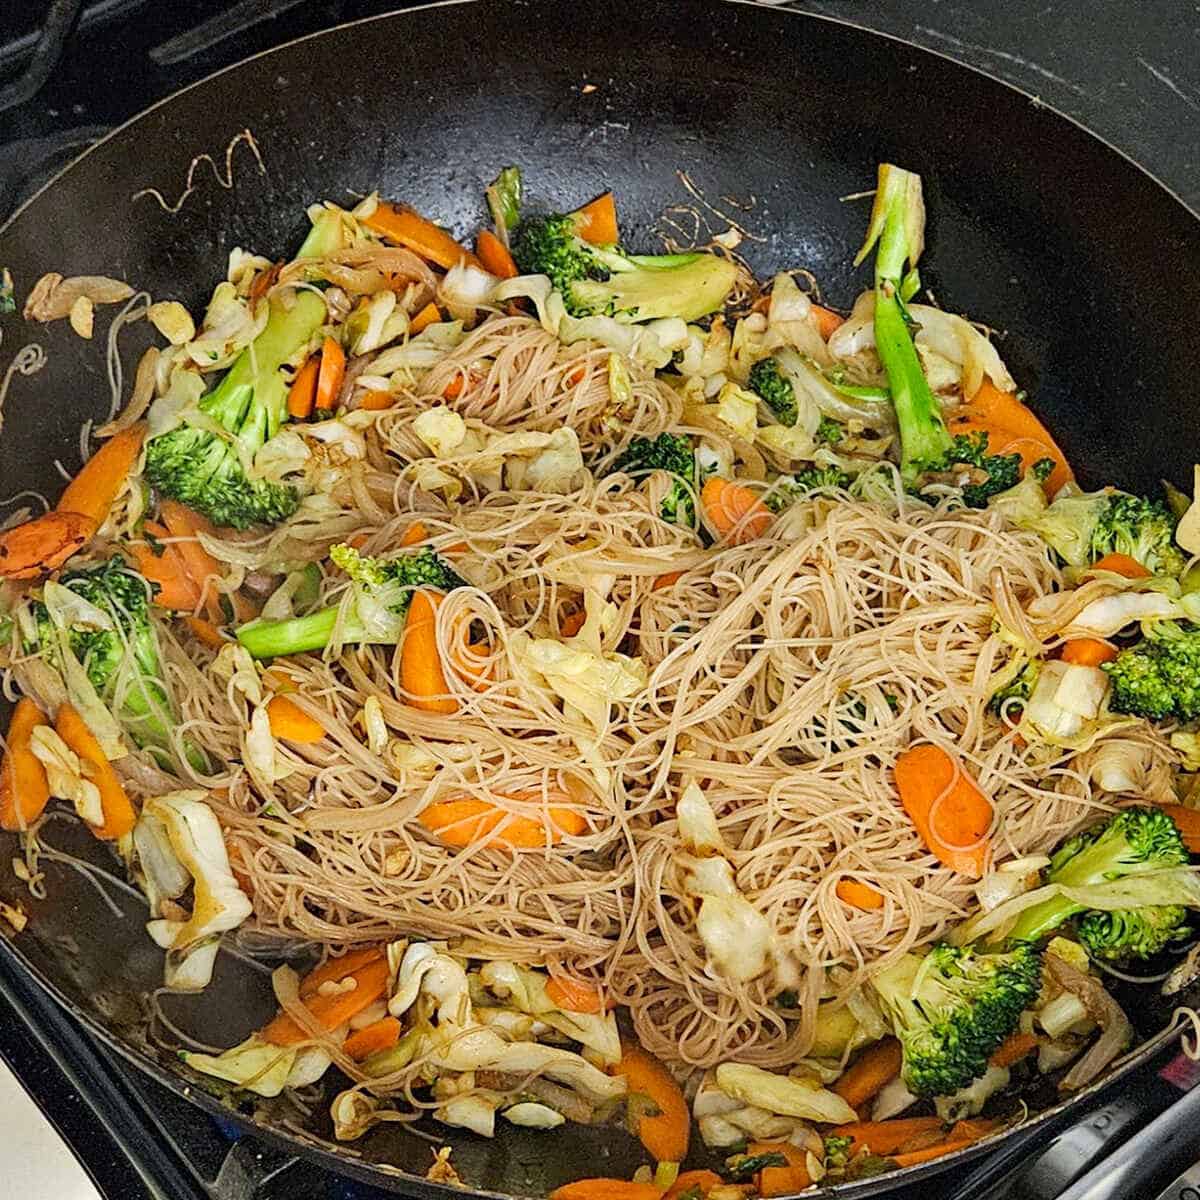 easy Asian vegetable stir fry rice noodles in the wok seasoned with soy sauce ready to be served